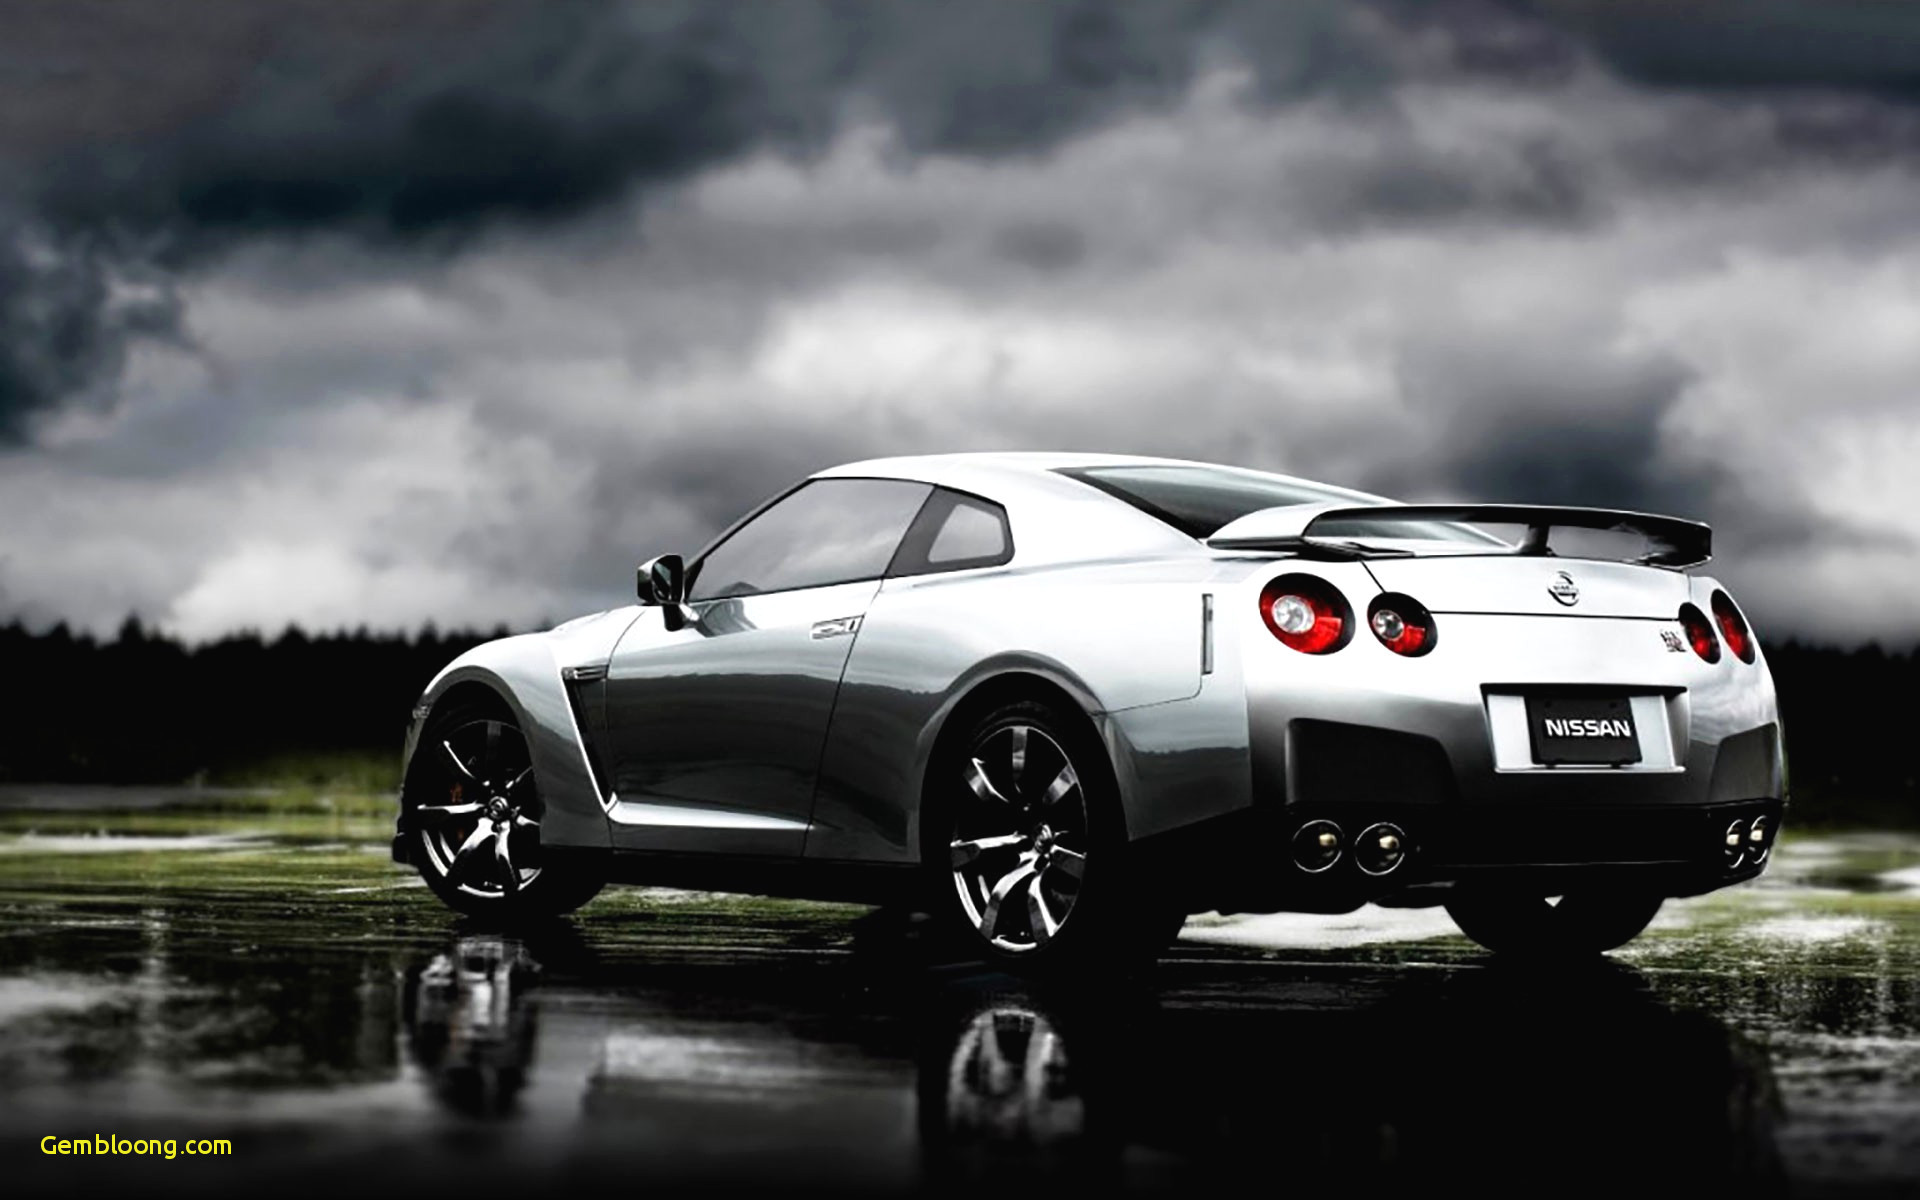 1920x1200 2018 Exotic Car Wallpaper New Amazing Wallpapers Desktop Awesome Cool Hd  Car Wallpapers Beautiful ...